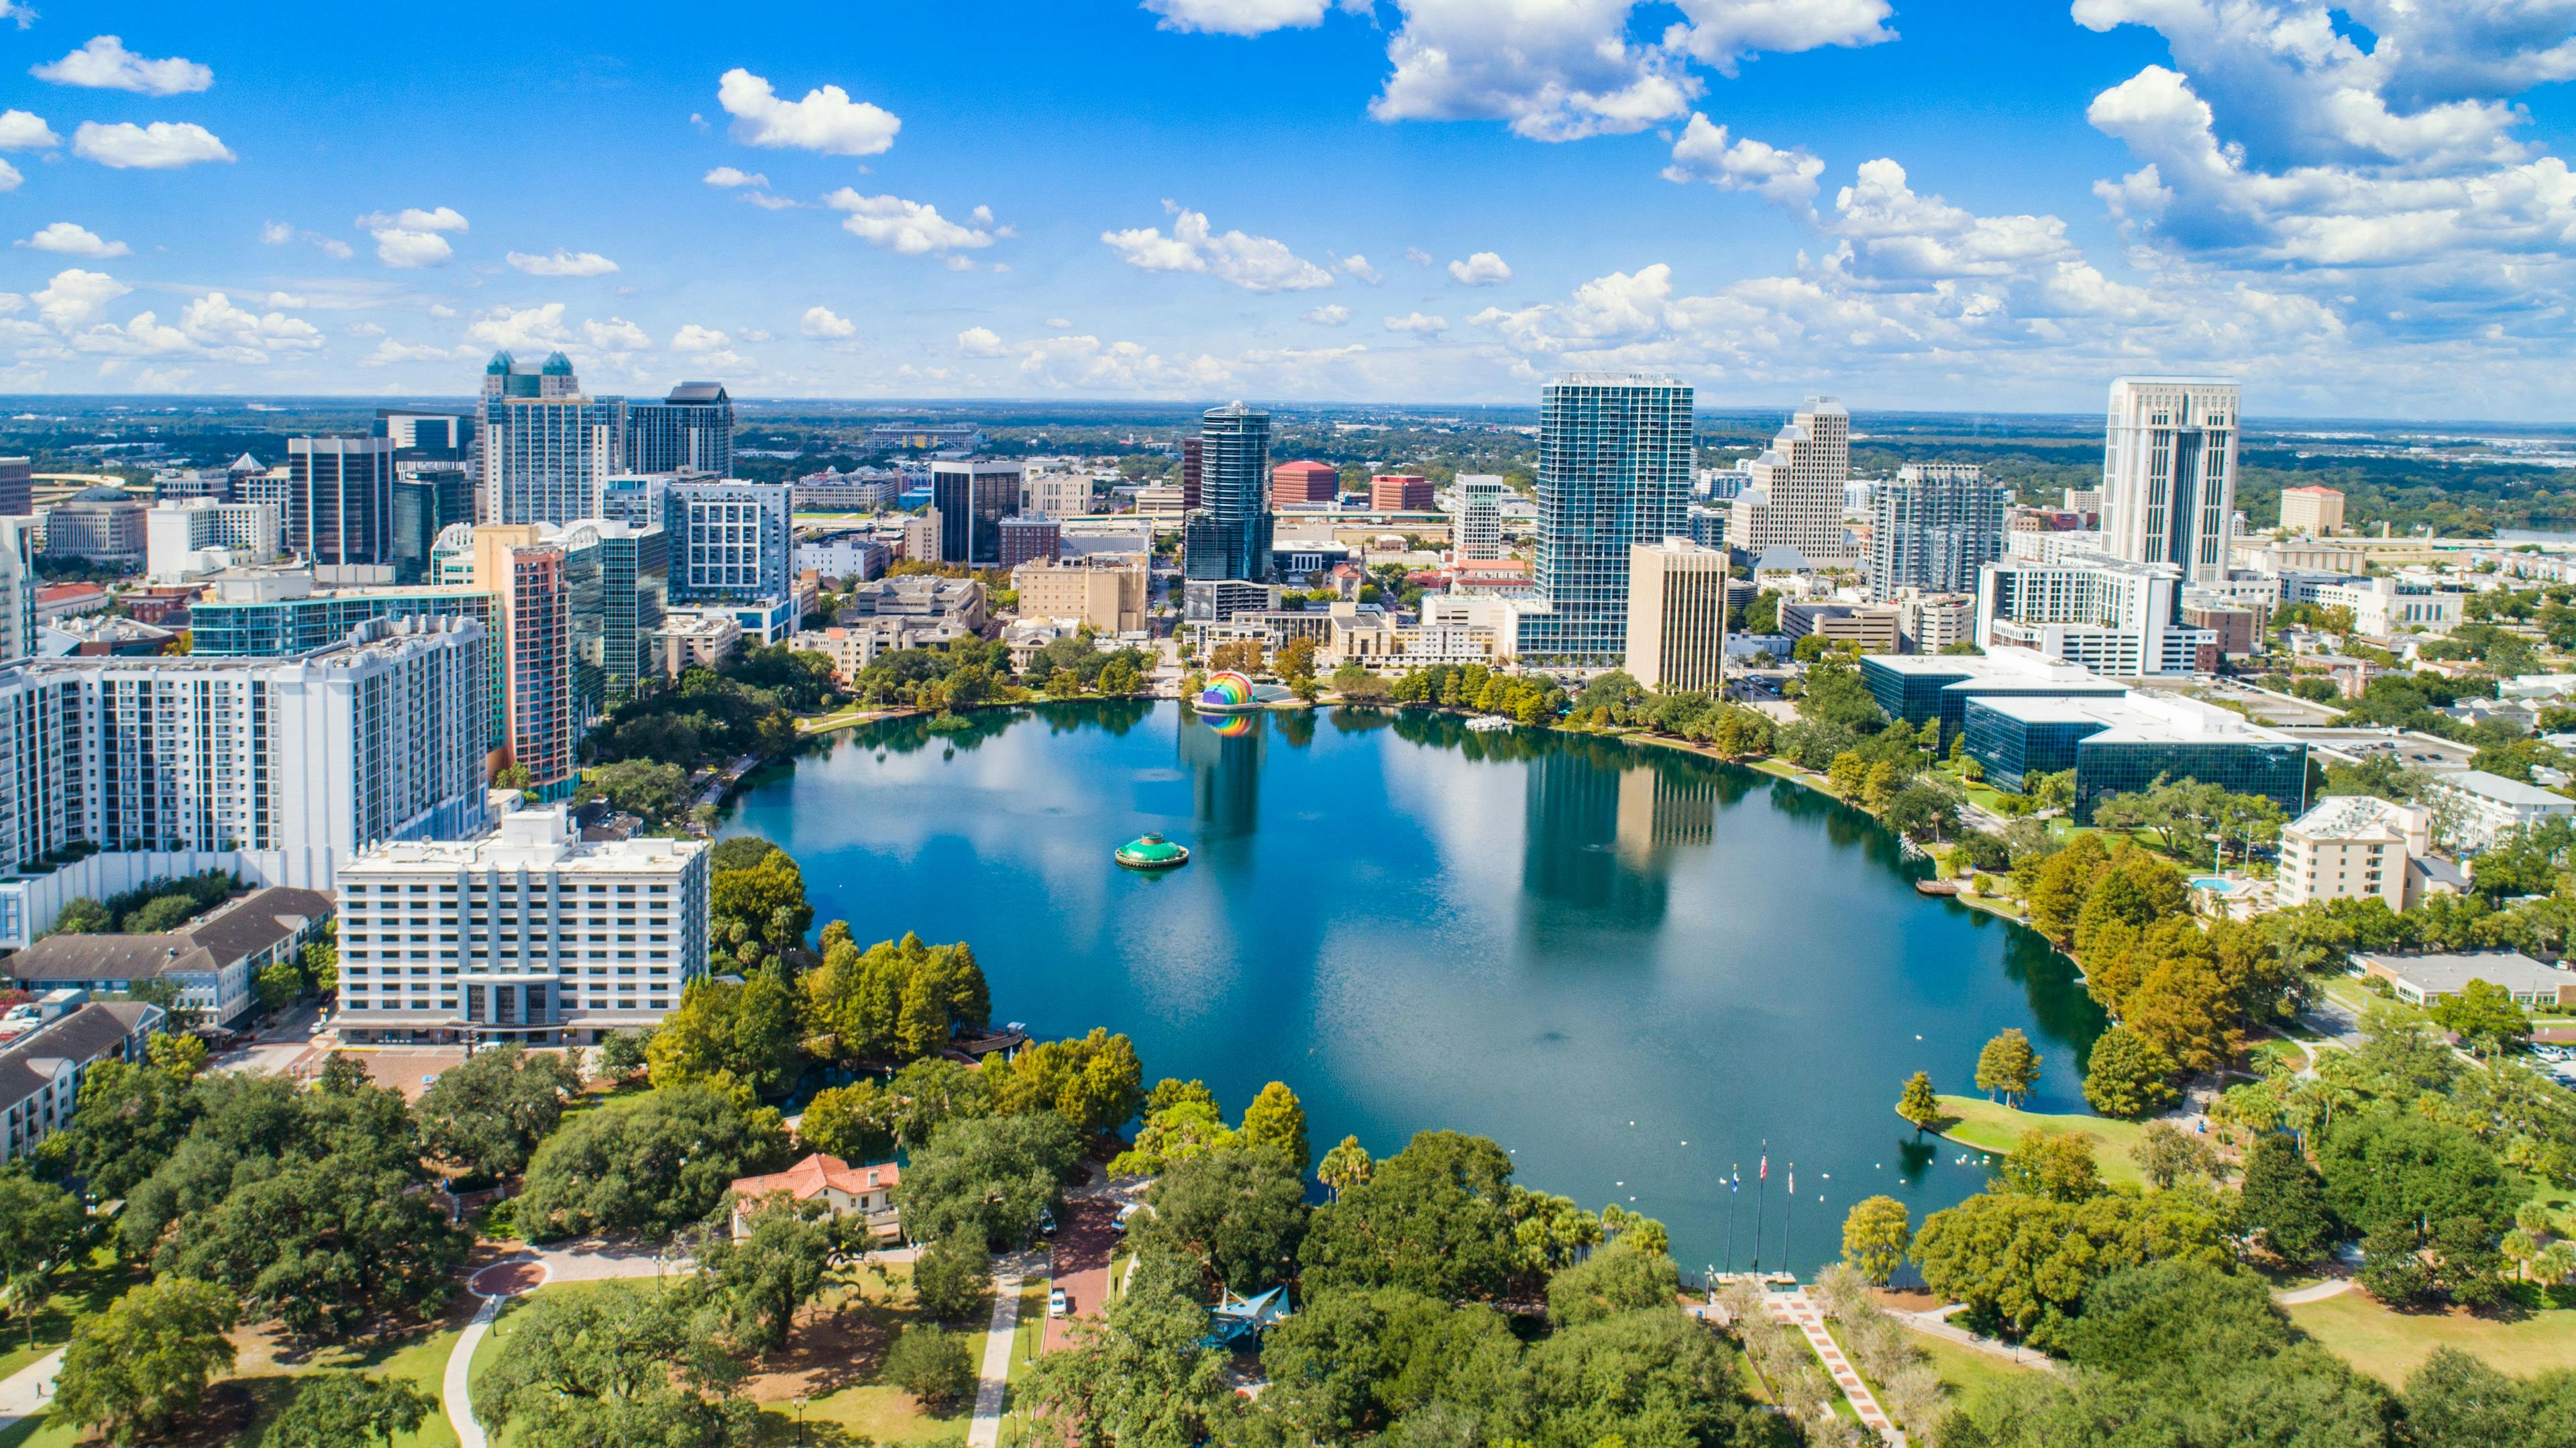 Plan Your Trip: What to do While Visiting Orlando 